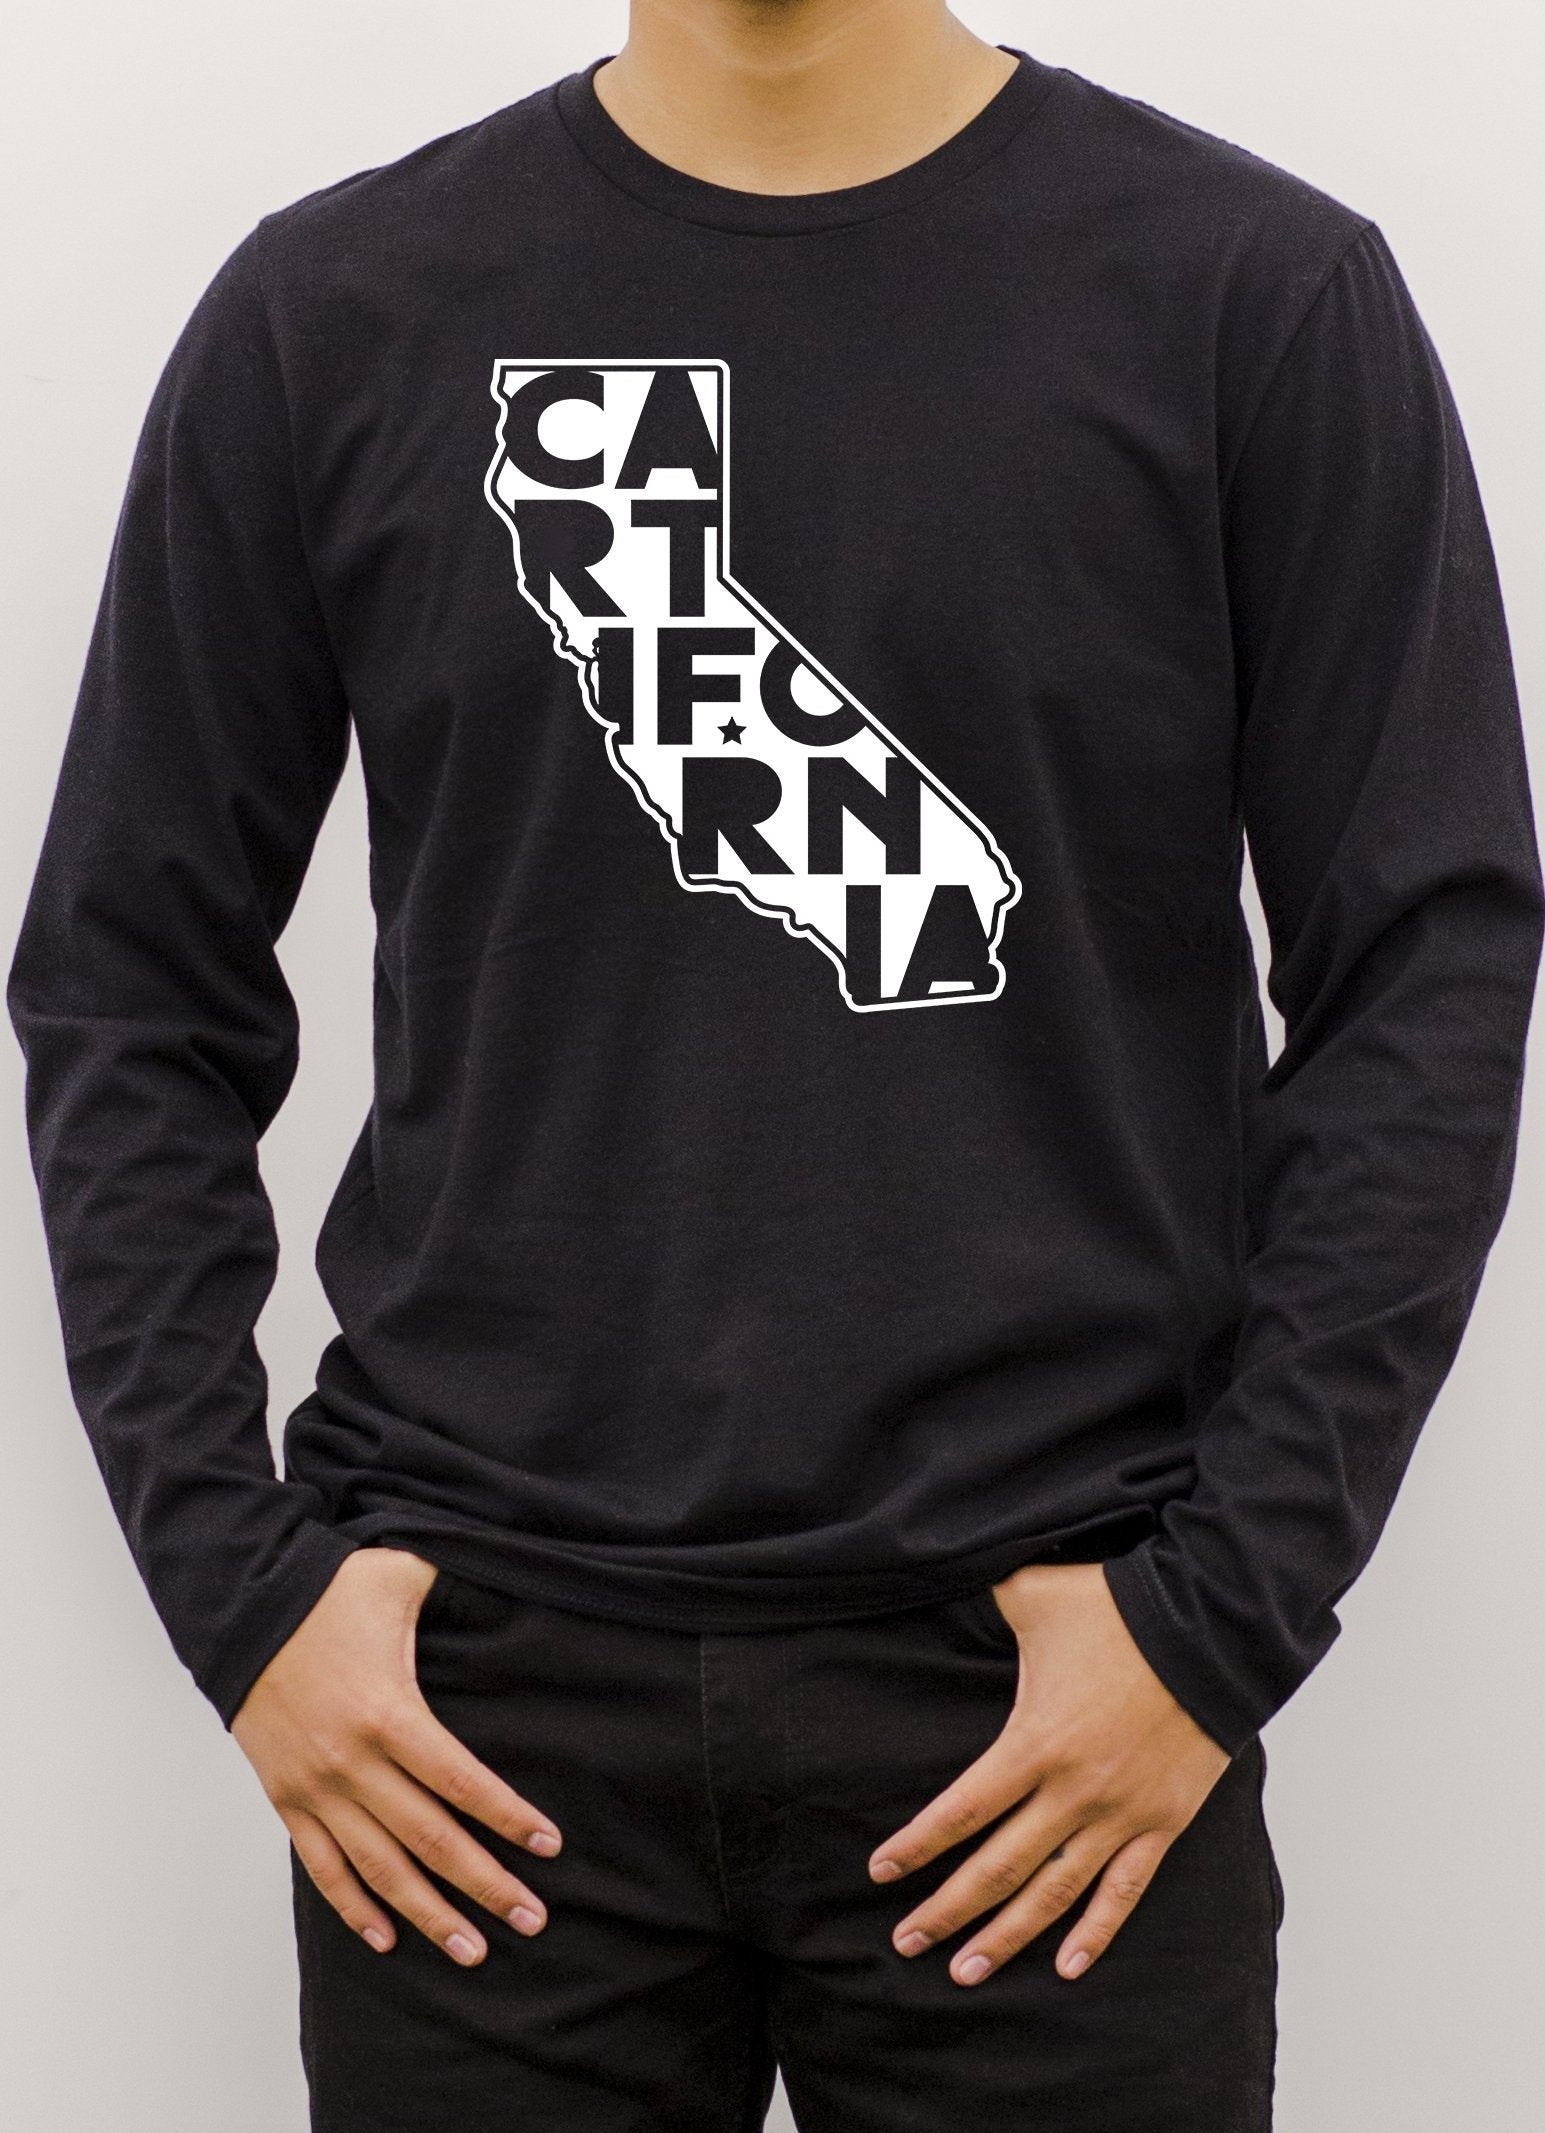 Long Sleeve T-Shirt - CARTifornia Colorful / Unisex Fit